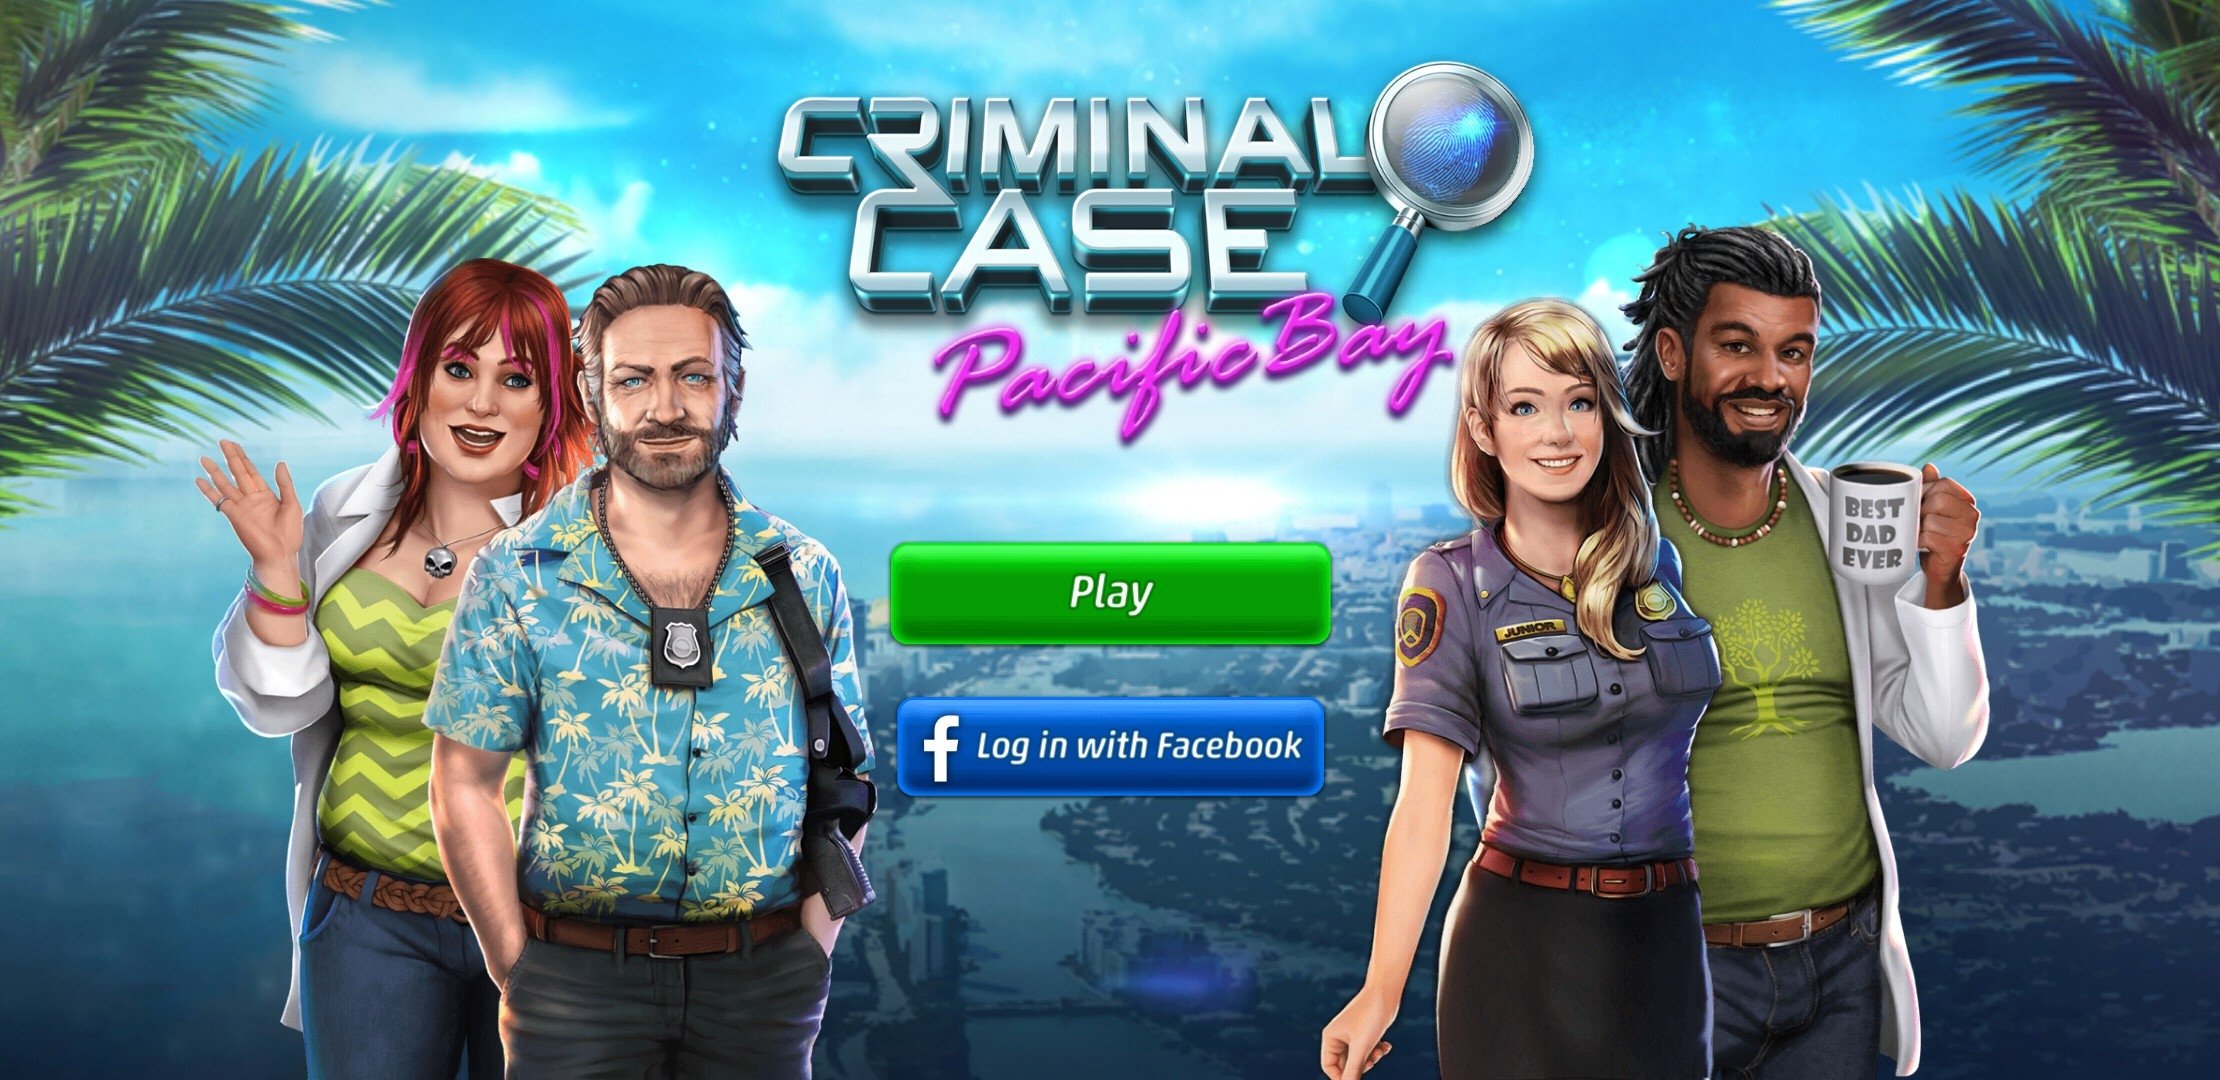 criminal case pacific bay running slow